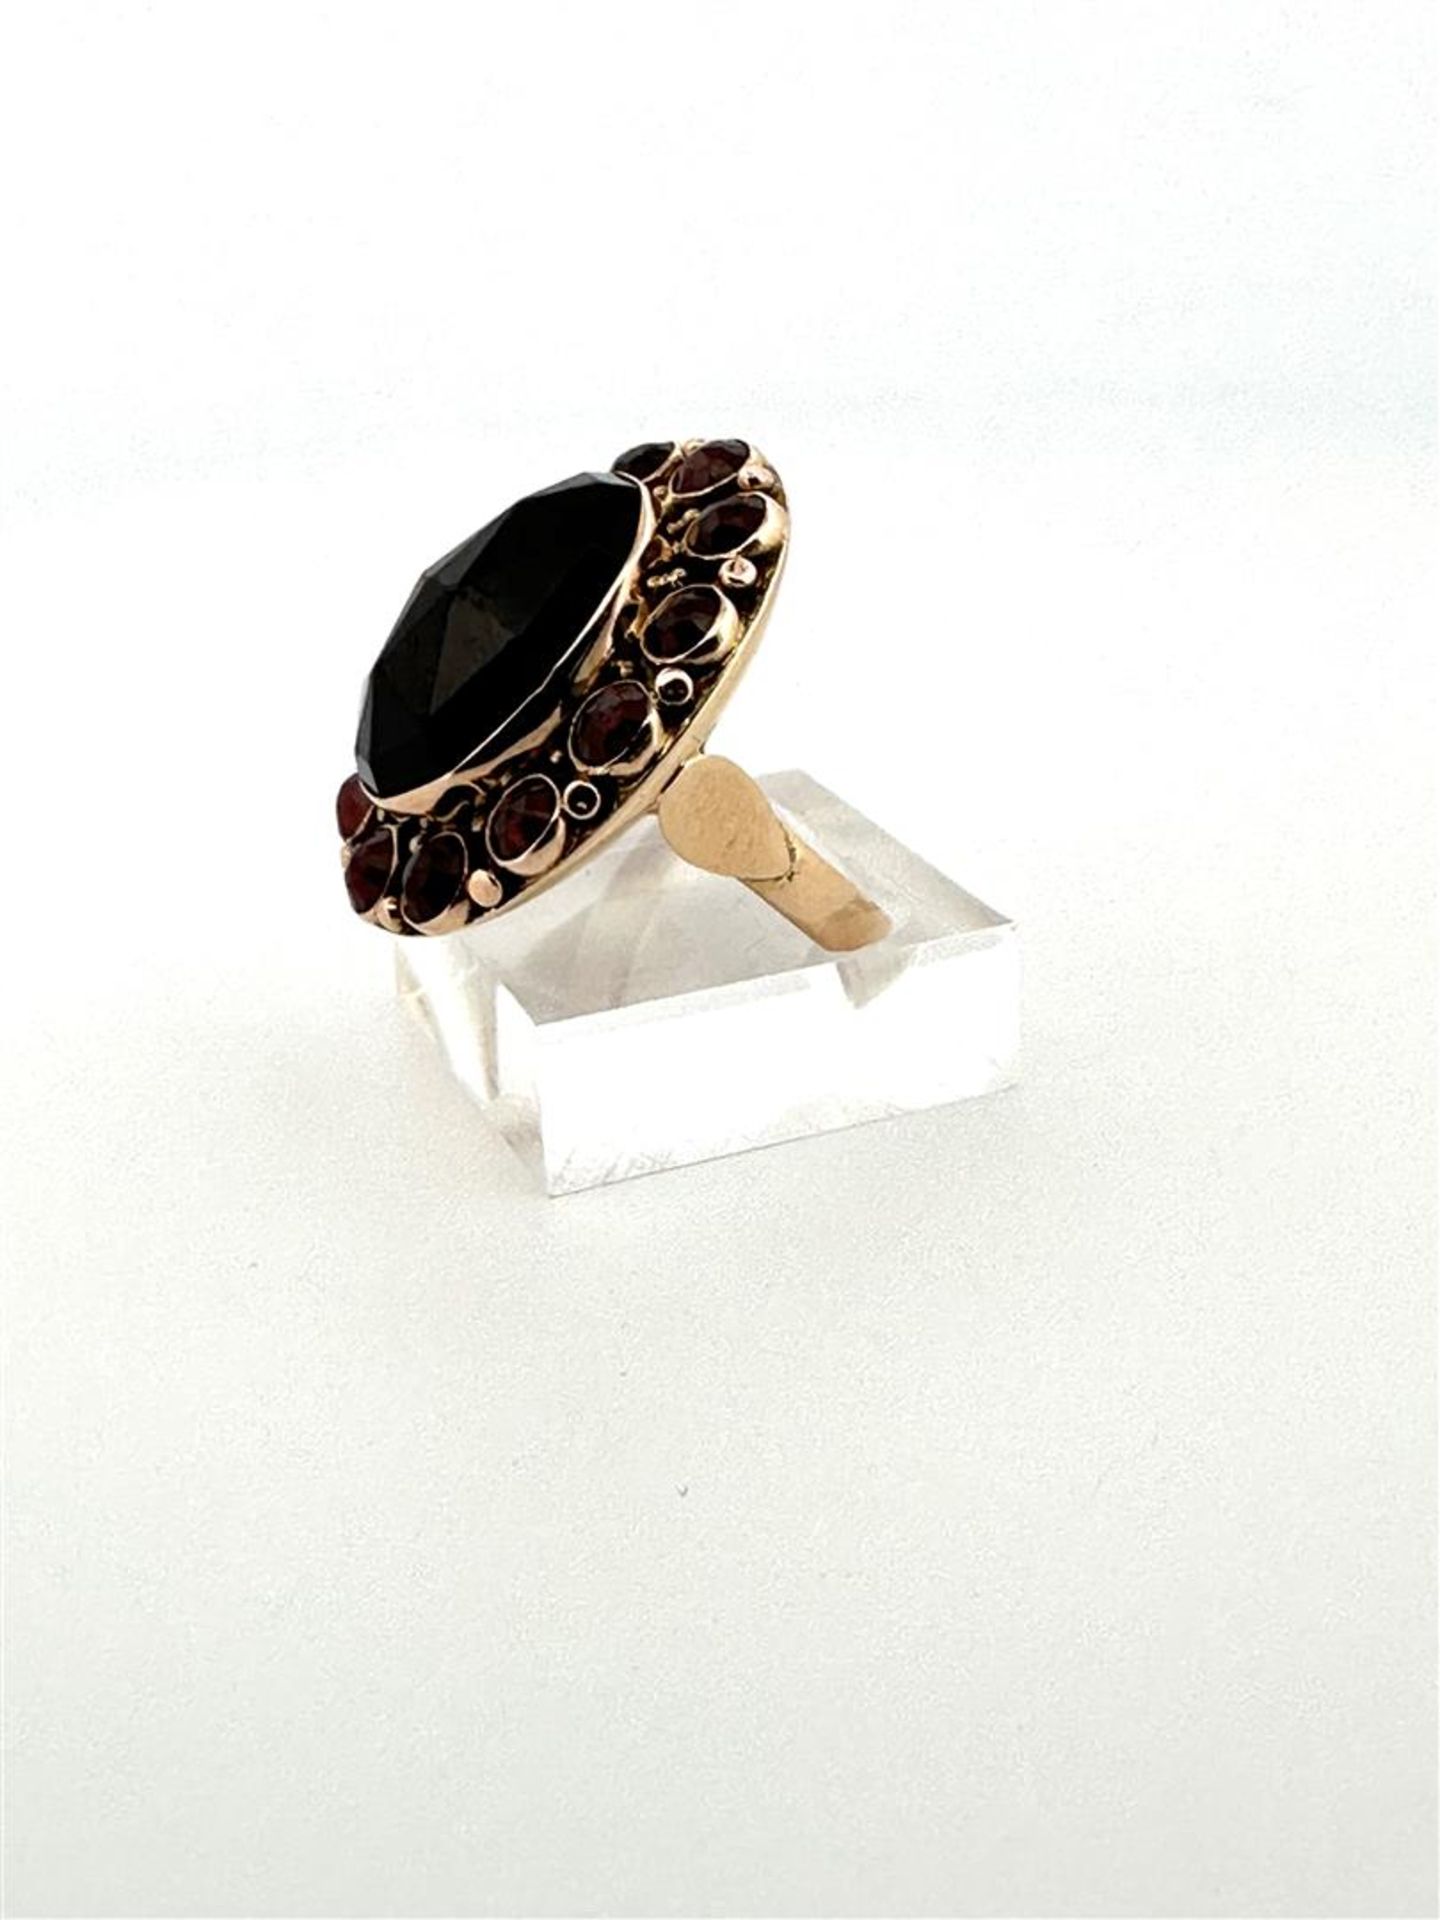 14kt yellow gold cocktail ring set with garnet.
The ring is set with 1 oval rose cut garnet measurin - Bild 3 aus 5